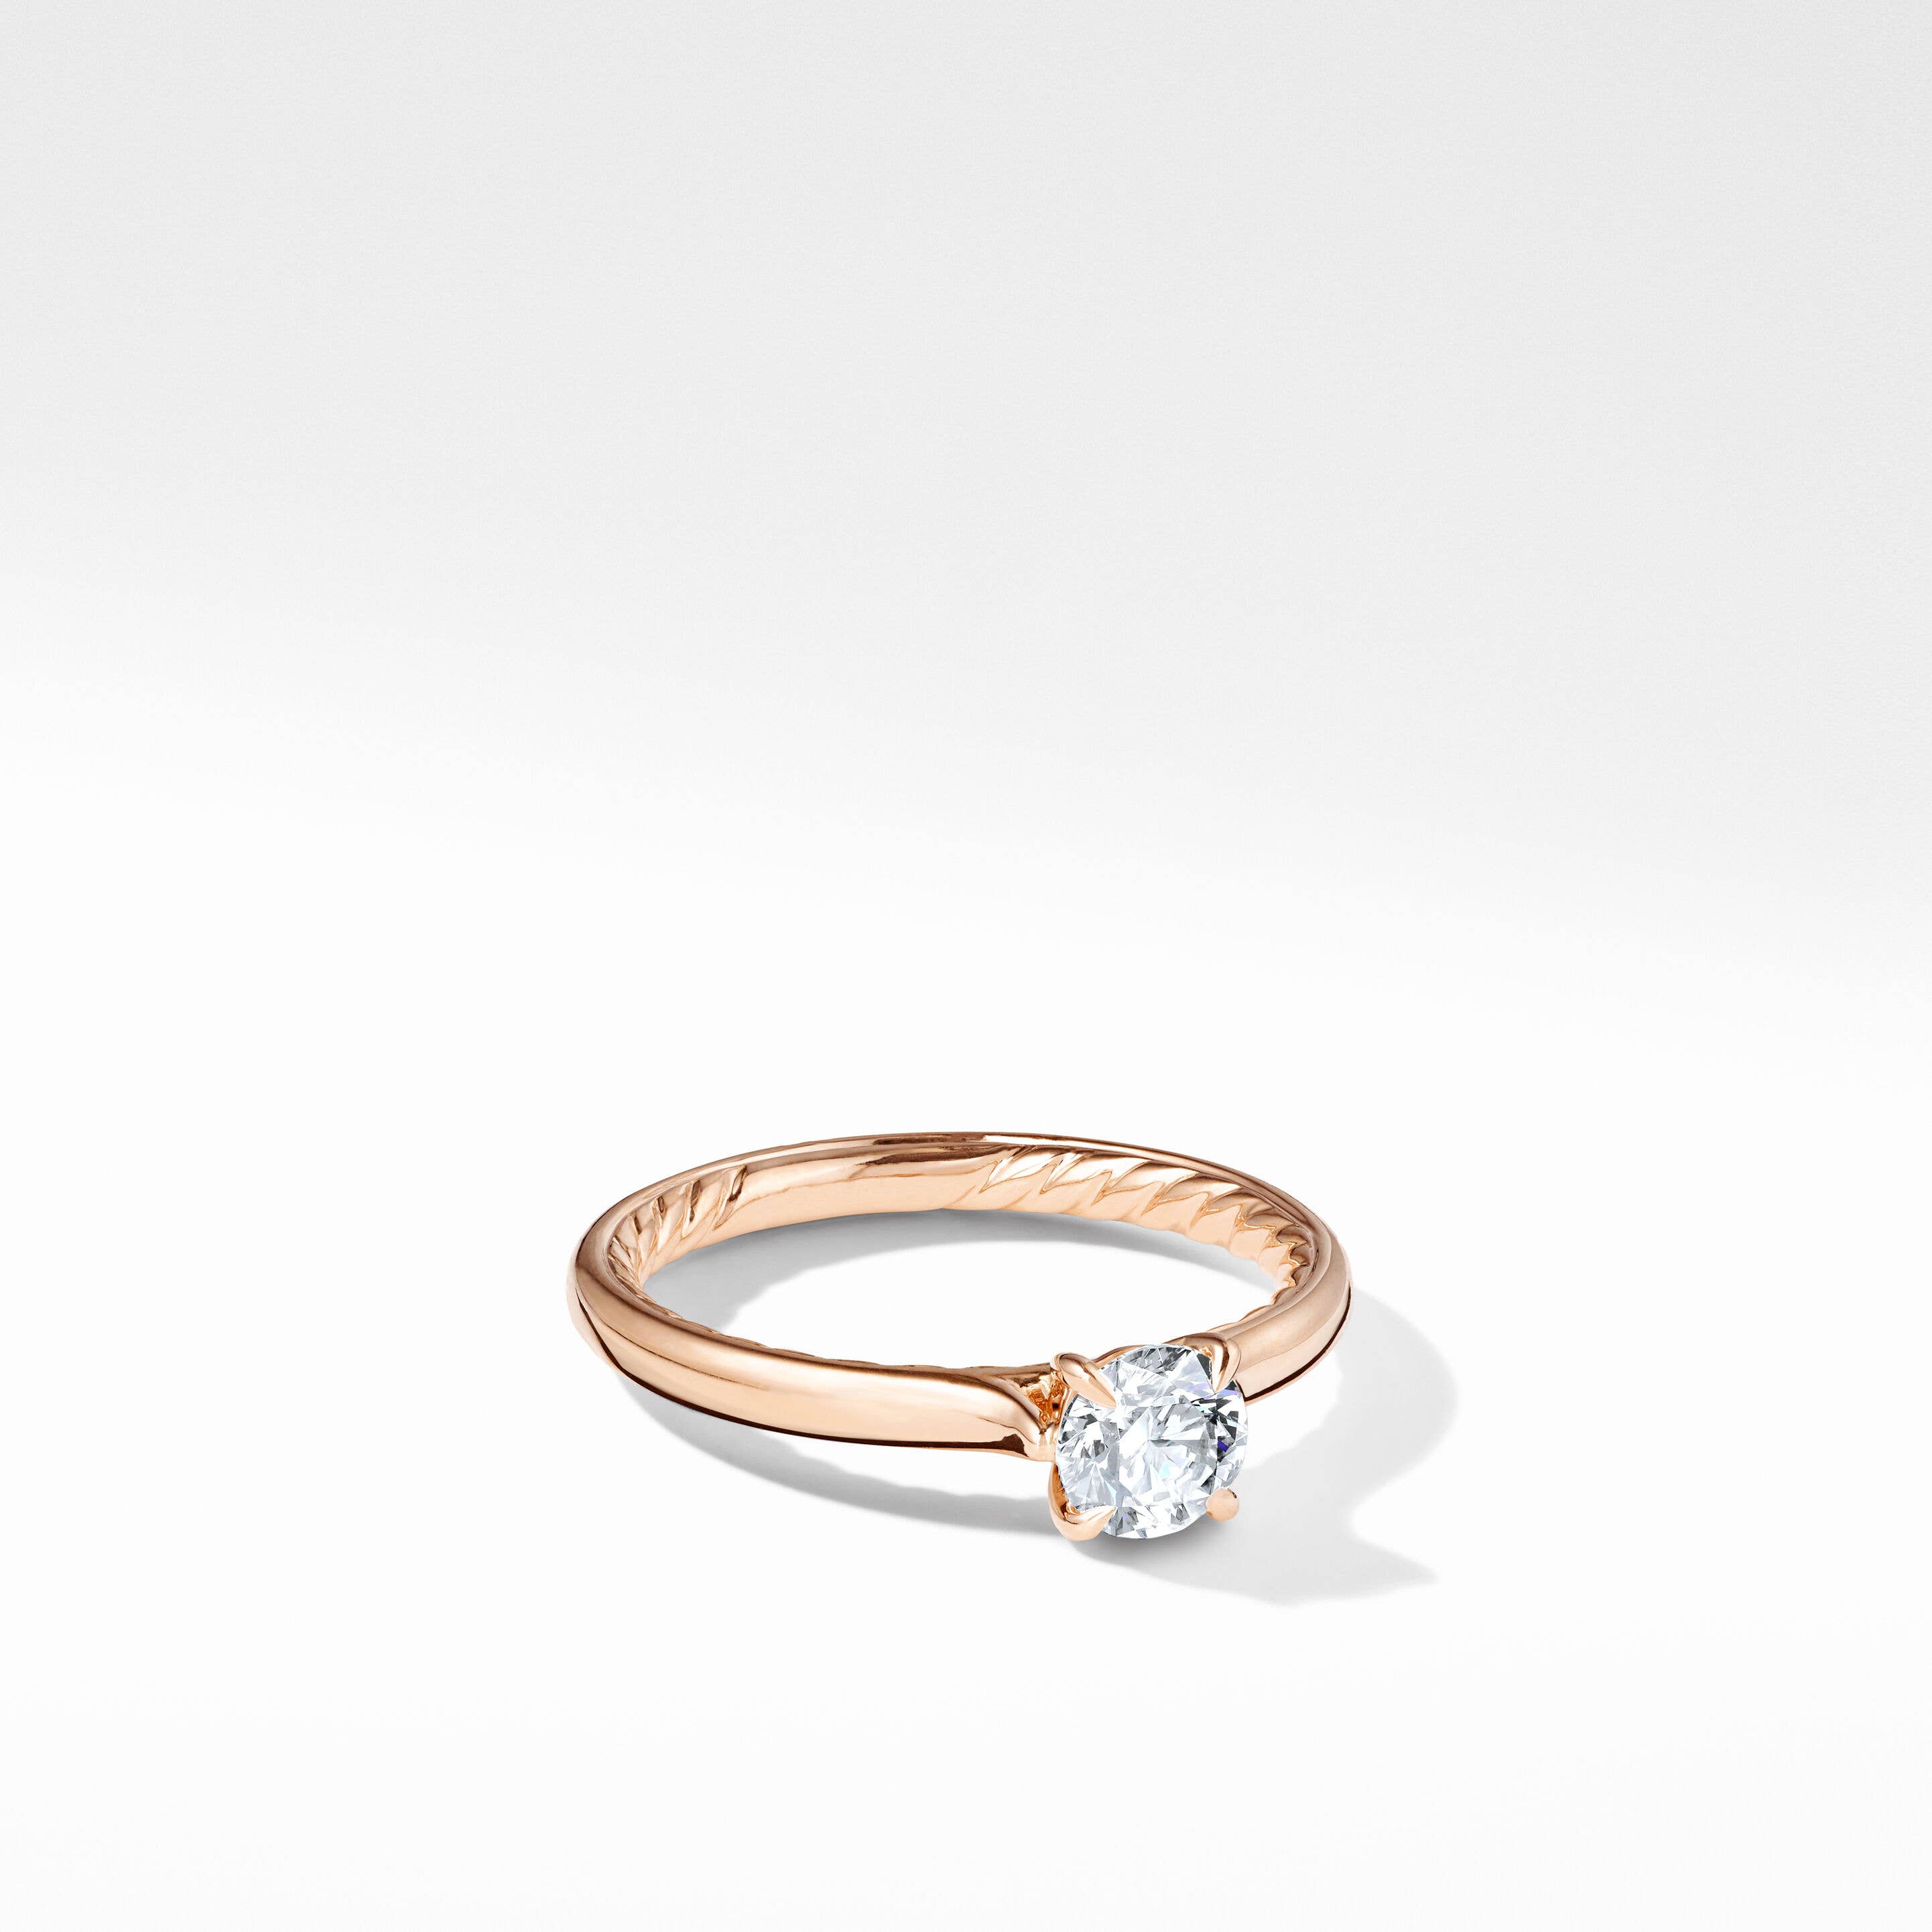 DY Eden Petite Engagement Ring in 18K Rose Gold, Round